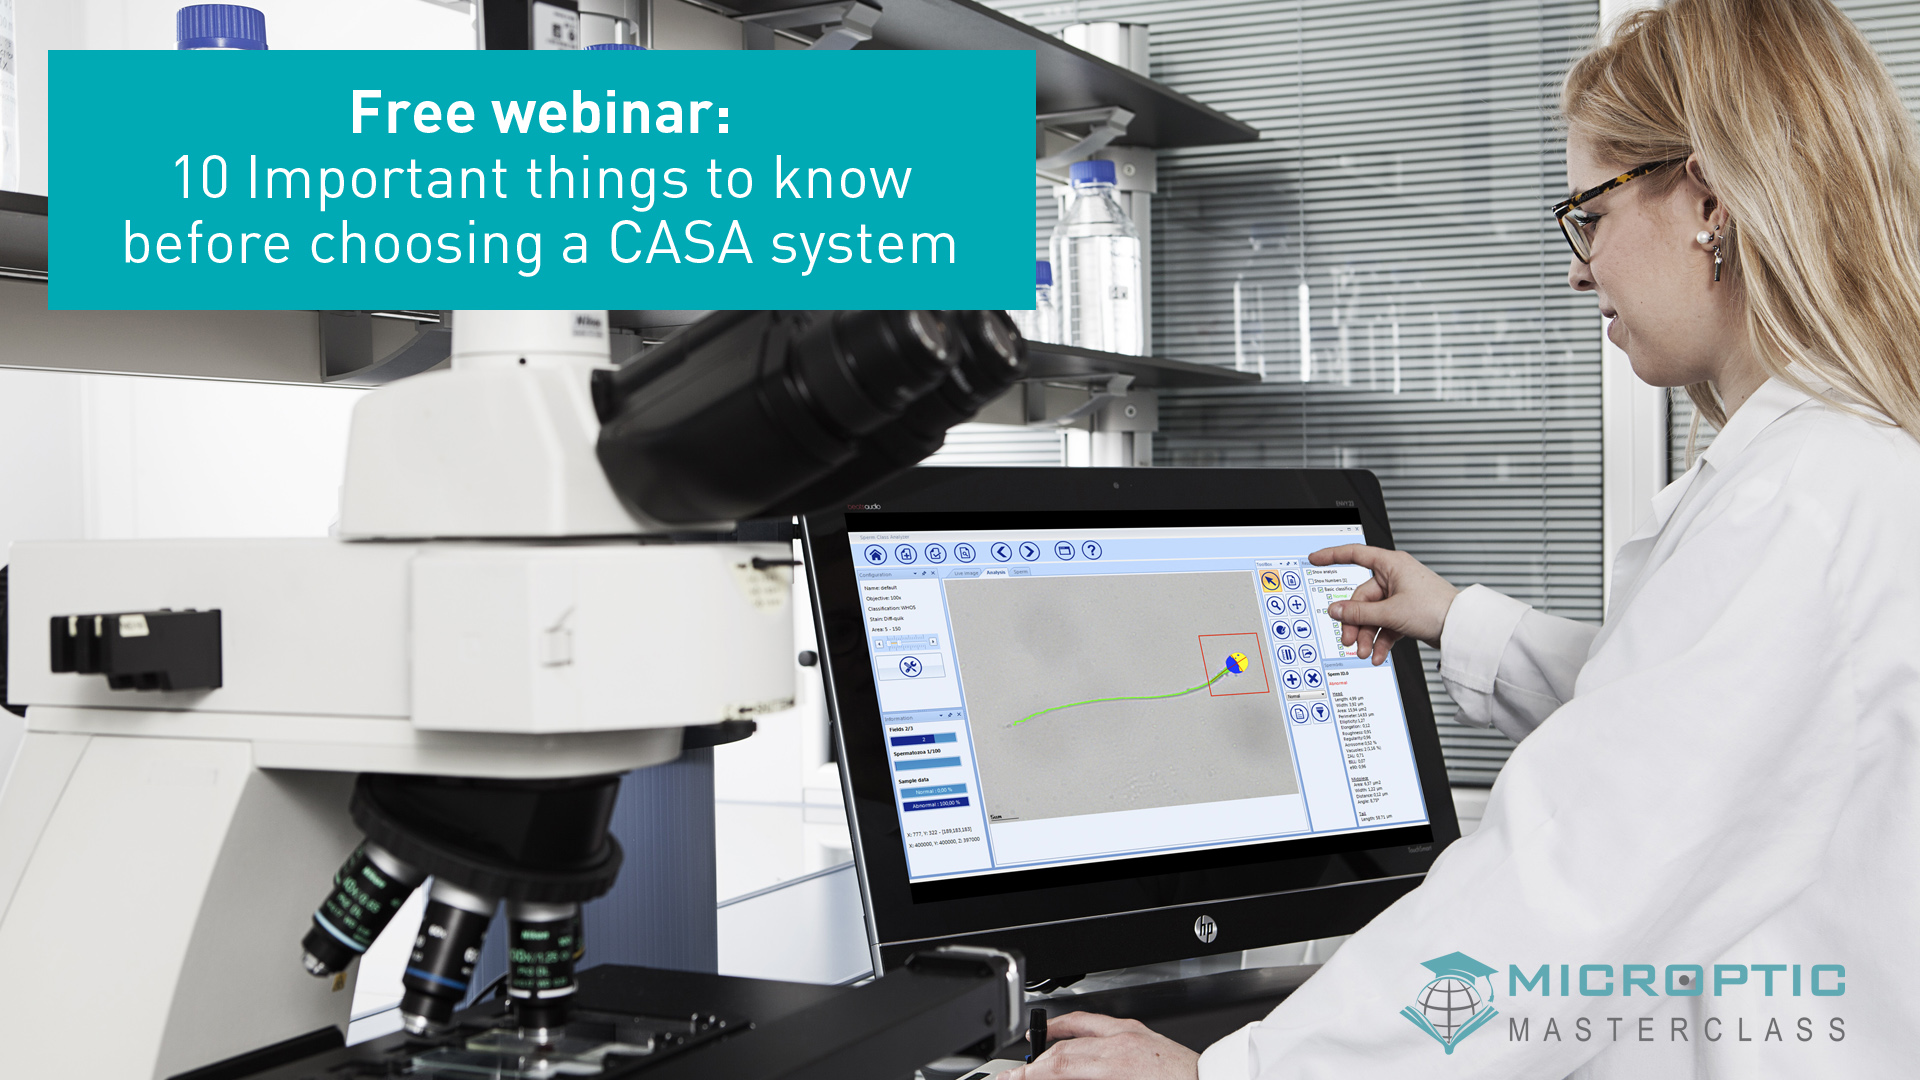 Webinar by Mircroptic: 10 Important things for a CASA system